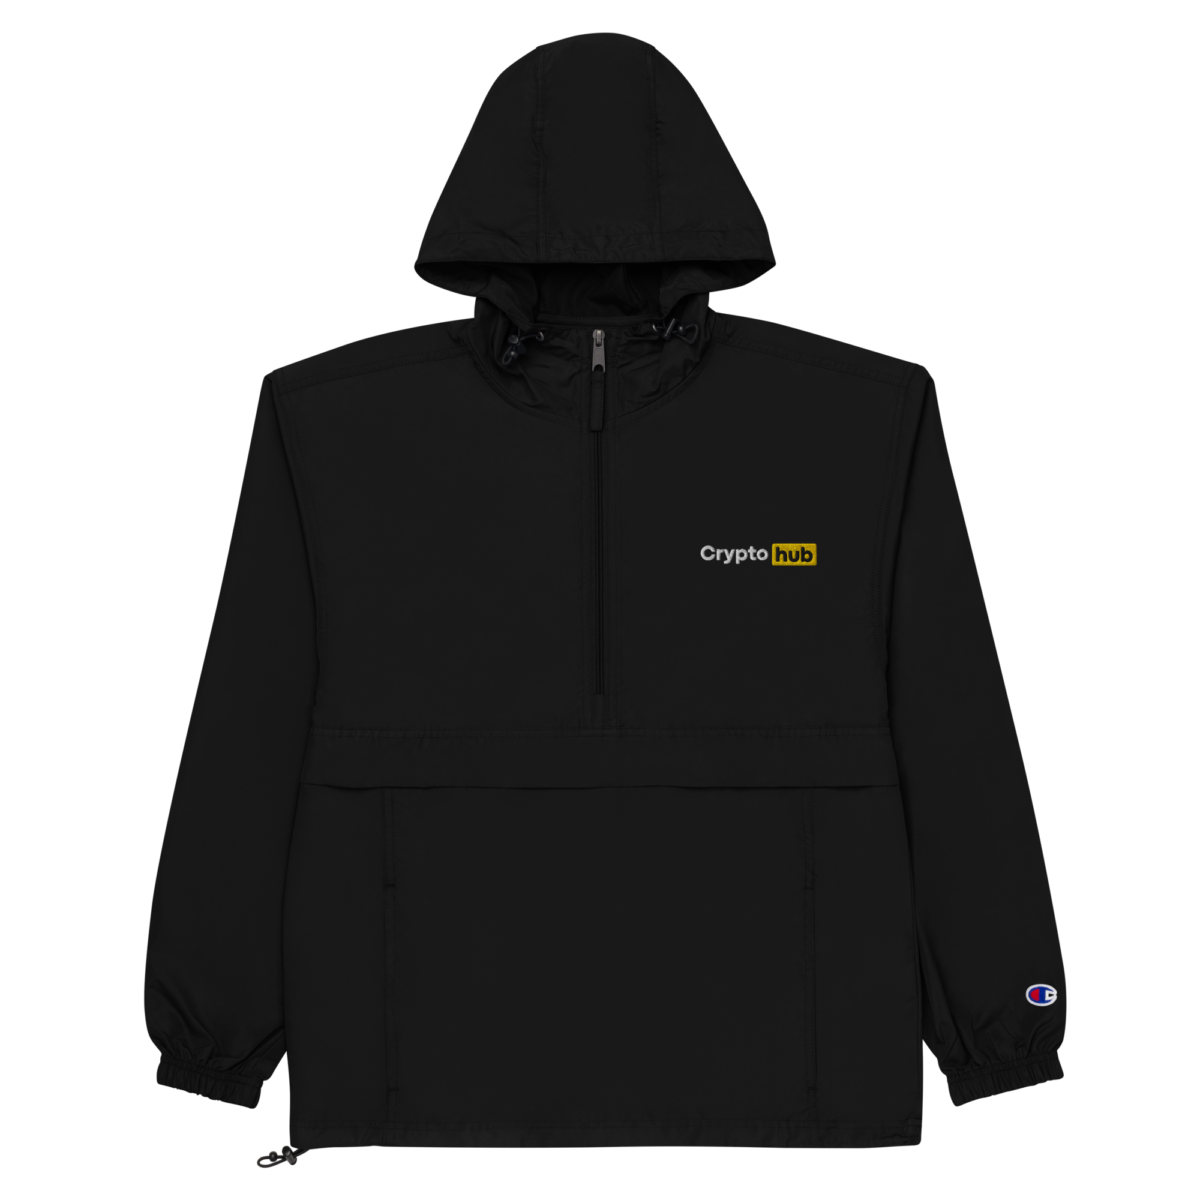 embroidered champion packable jacket black front 631f4496a86d4 - Crypto Hub Champion Packable Jacket